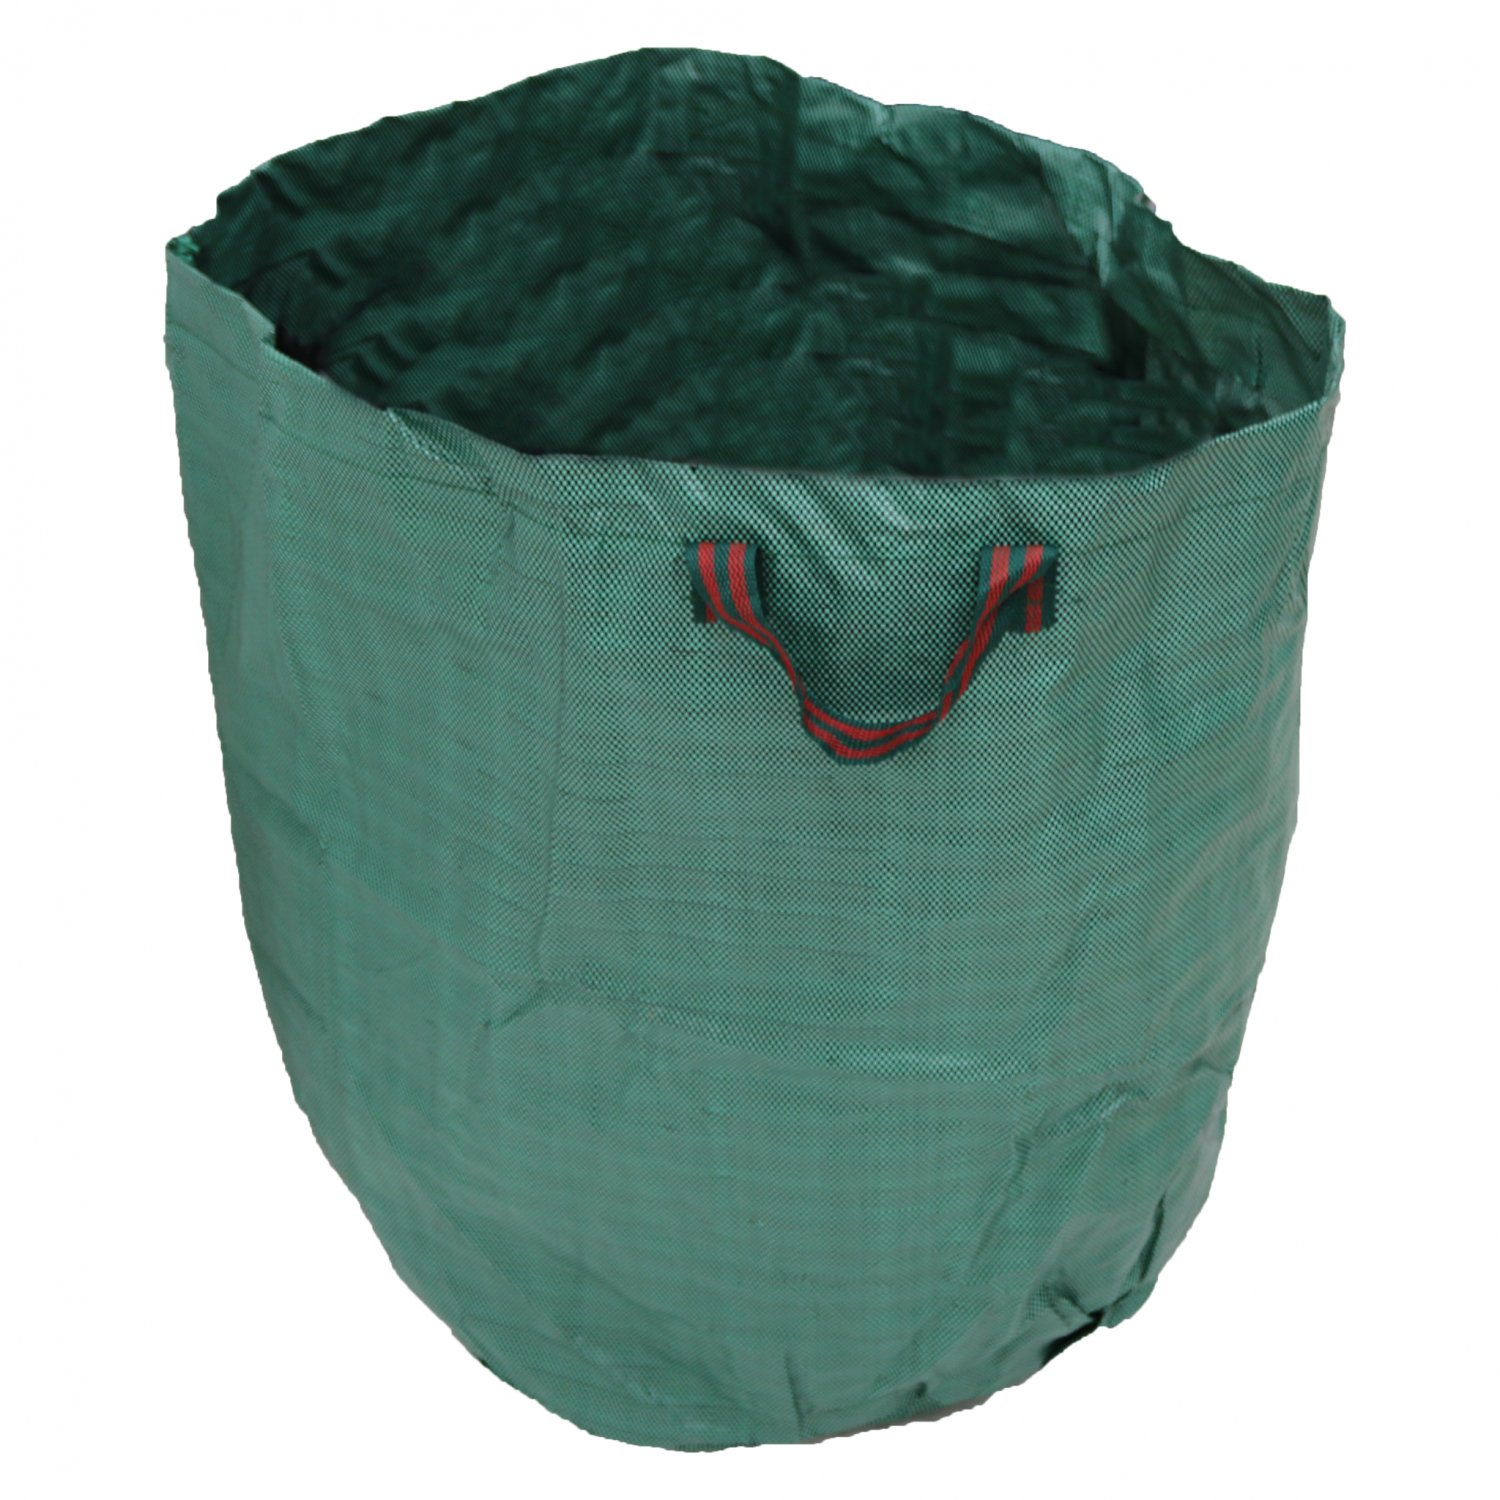 Large Heavy Duty 270L Garden Waste Bags Sacks - Pack of 3